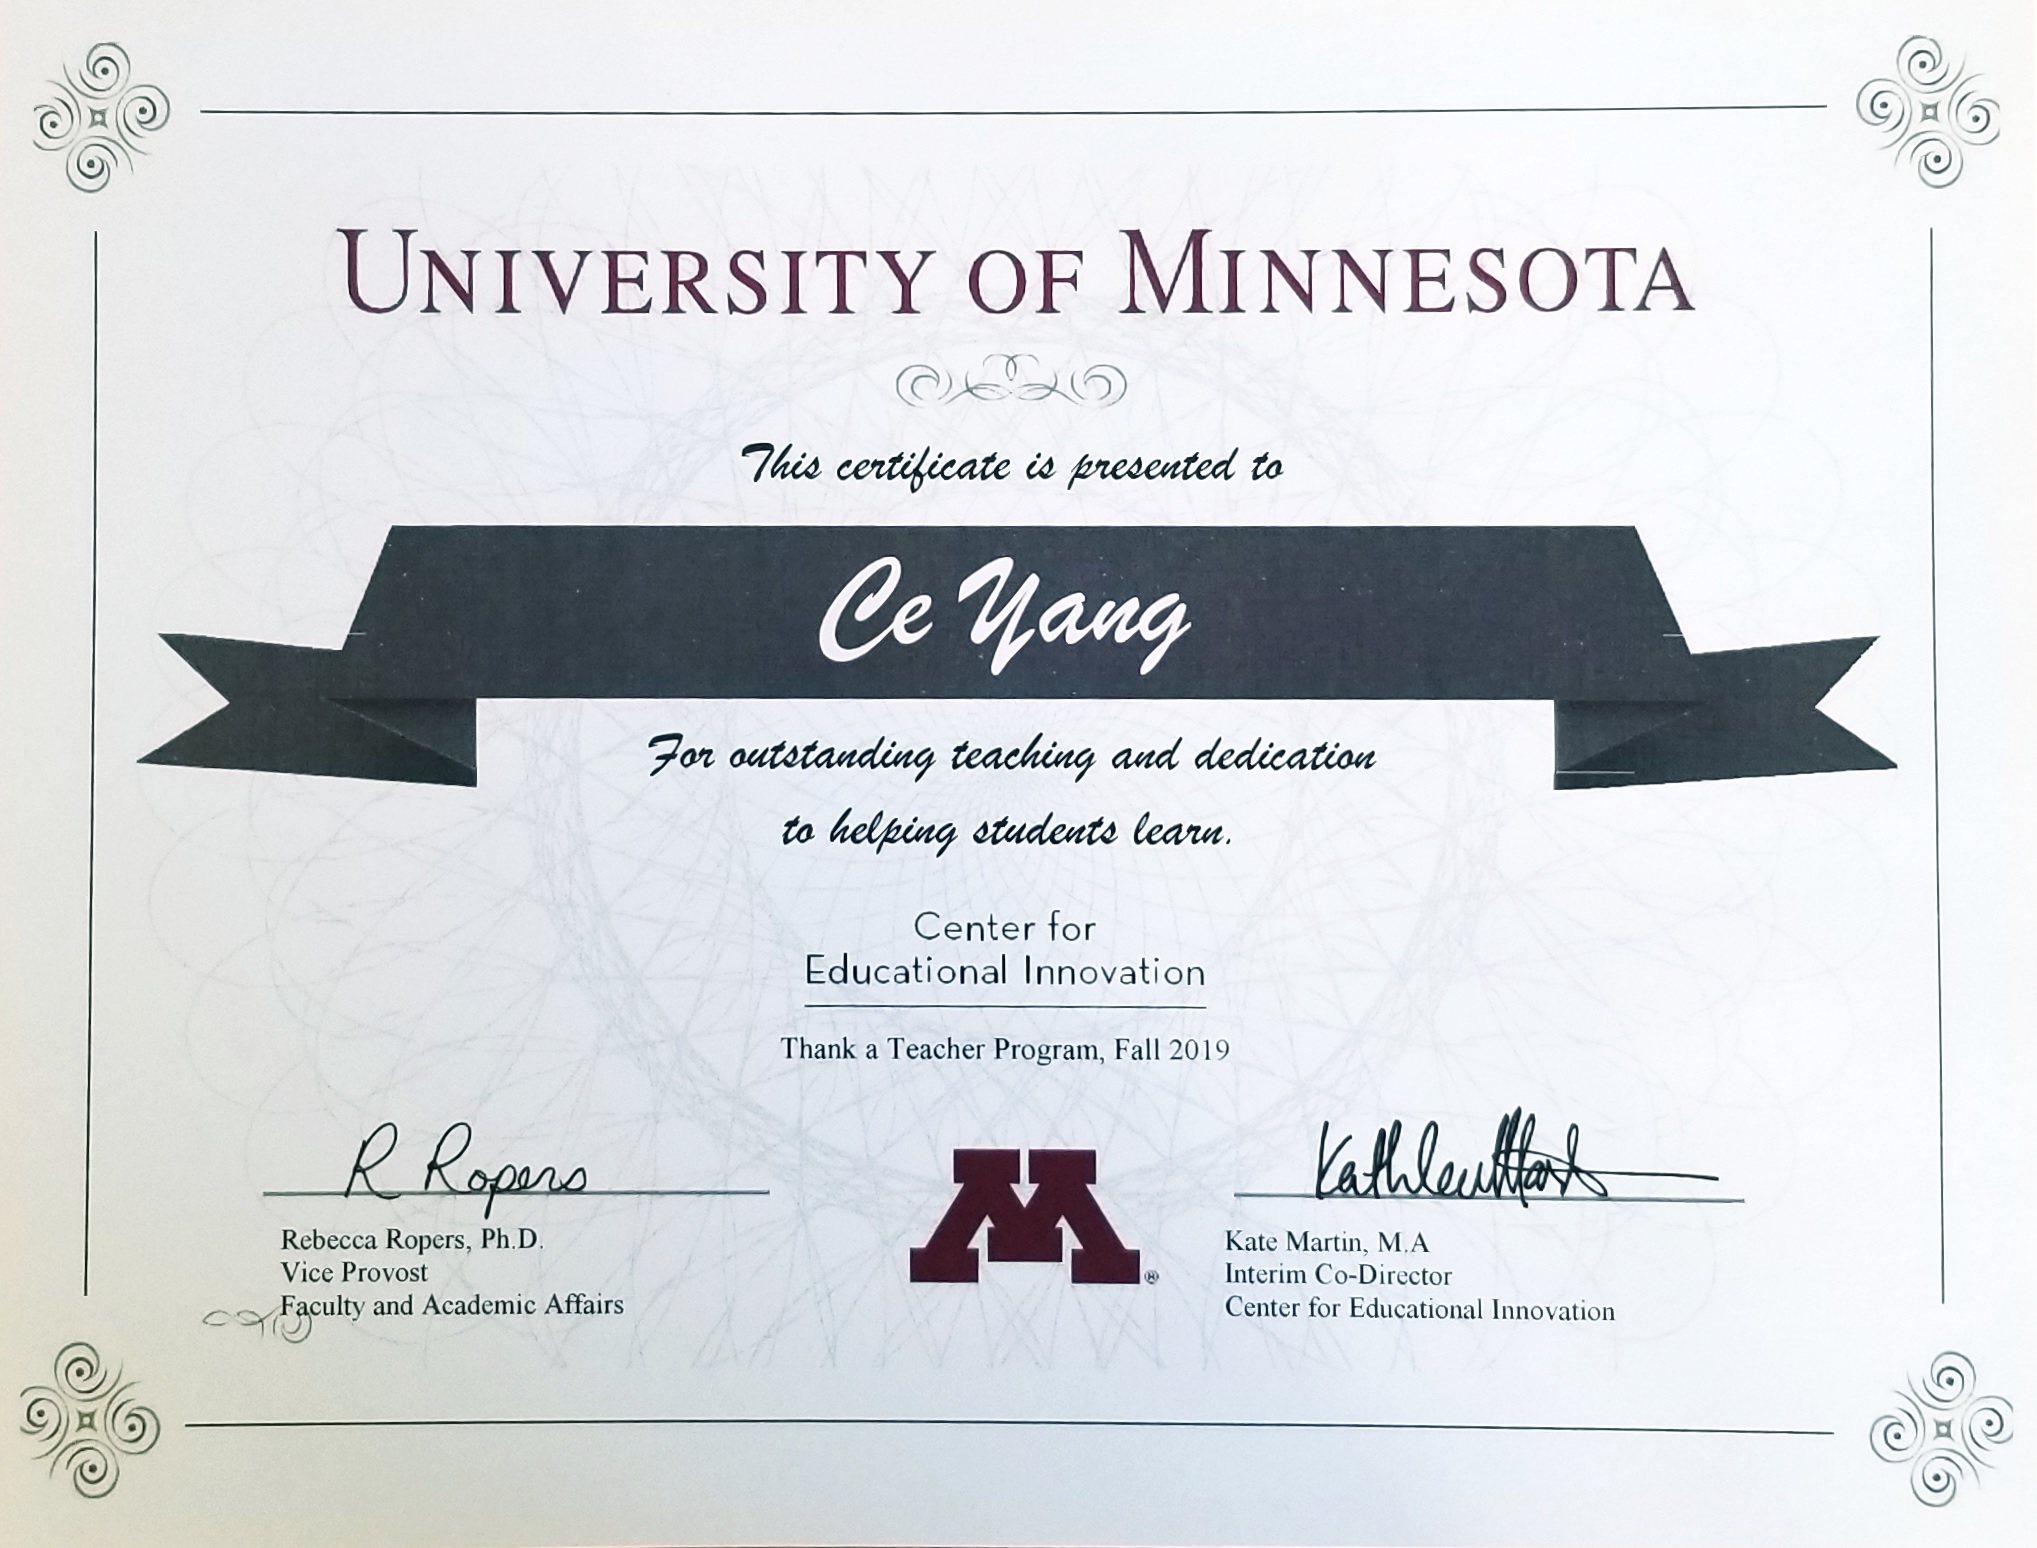 Certificate for outstanding teaching